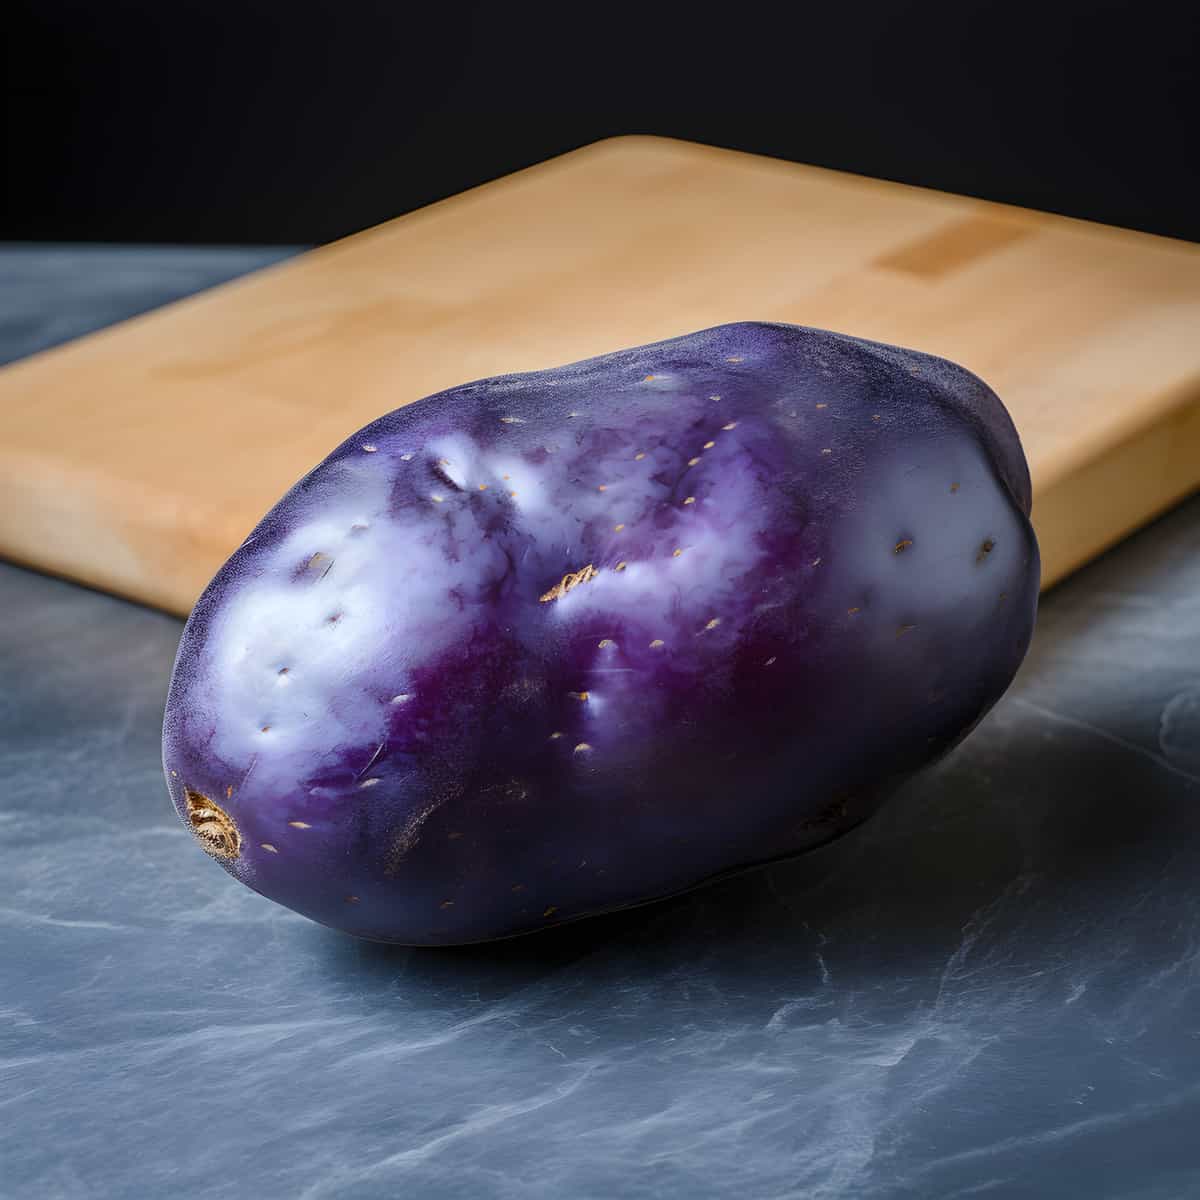 Sapphire Potatoes on a kitchen counter